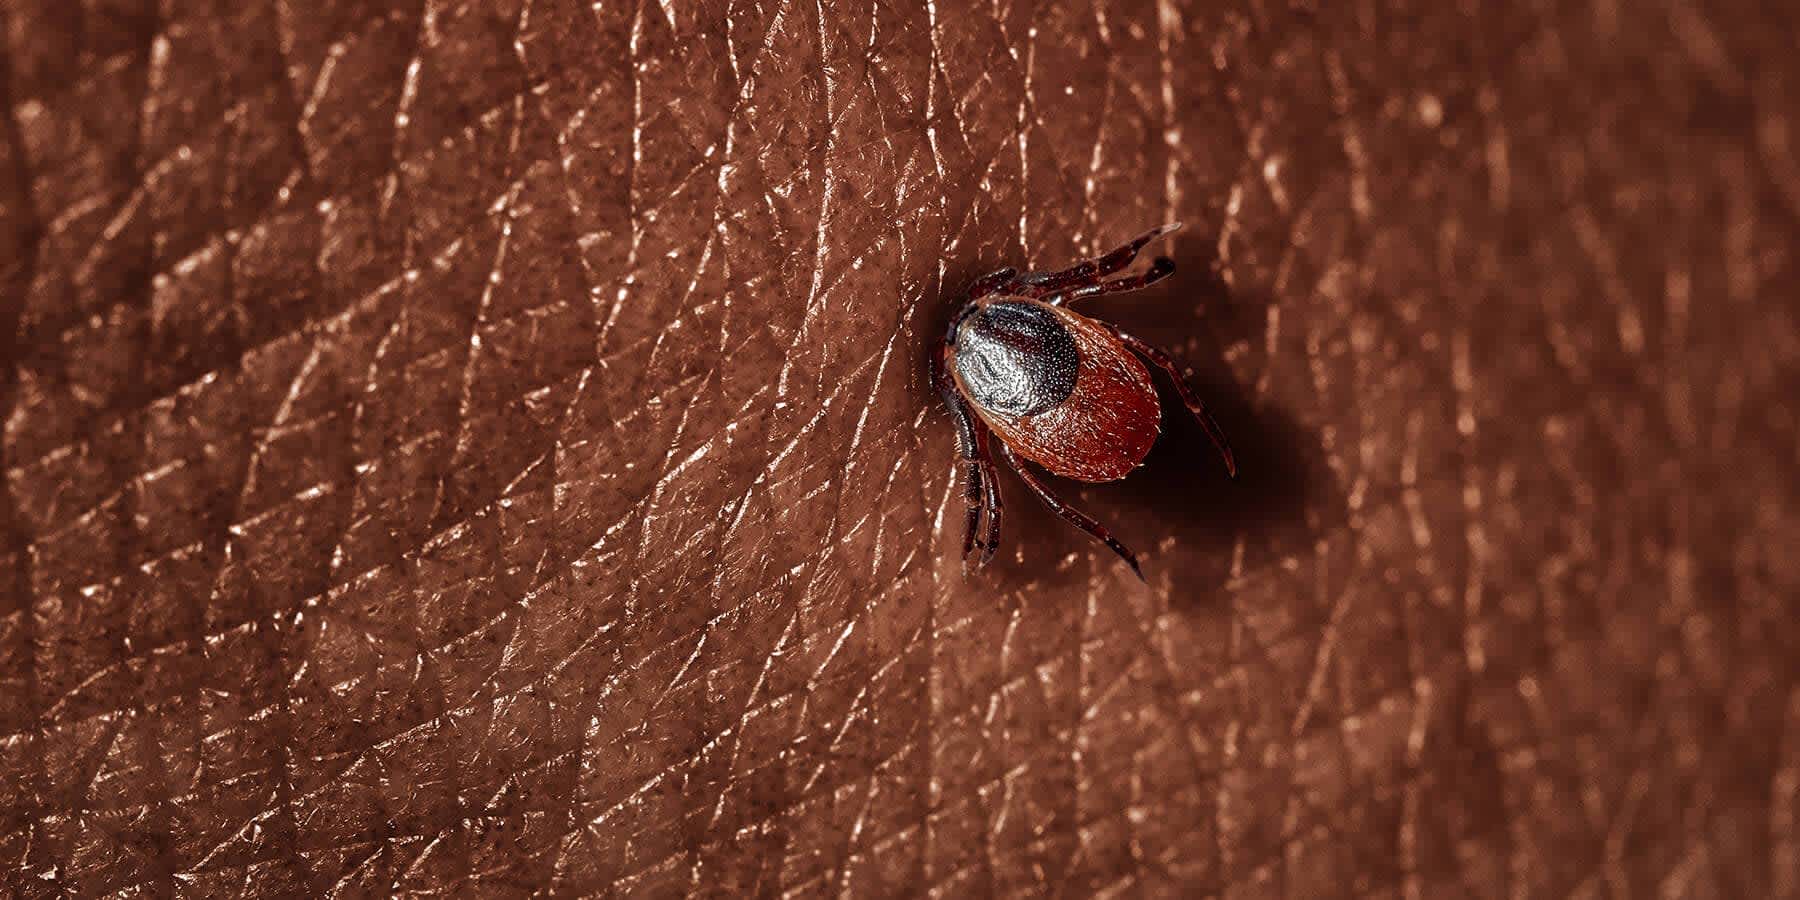 Tick with Lyme disease or Rocky Mountain Spotted Fever burrowed into skin